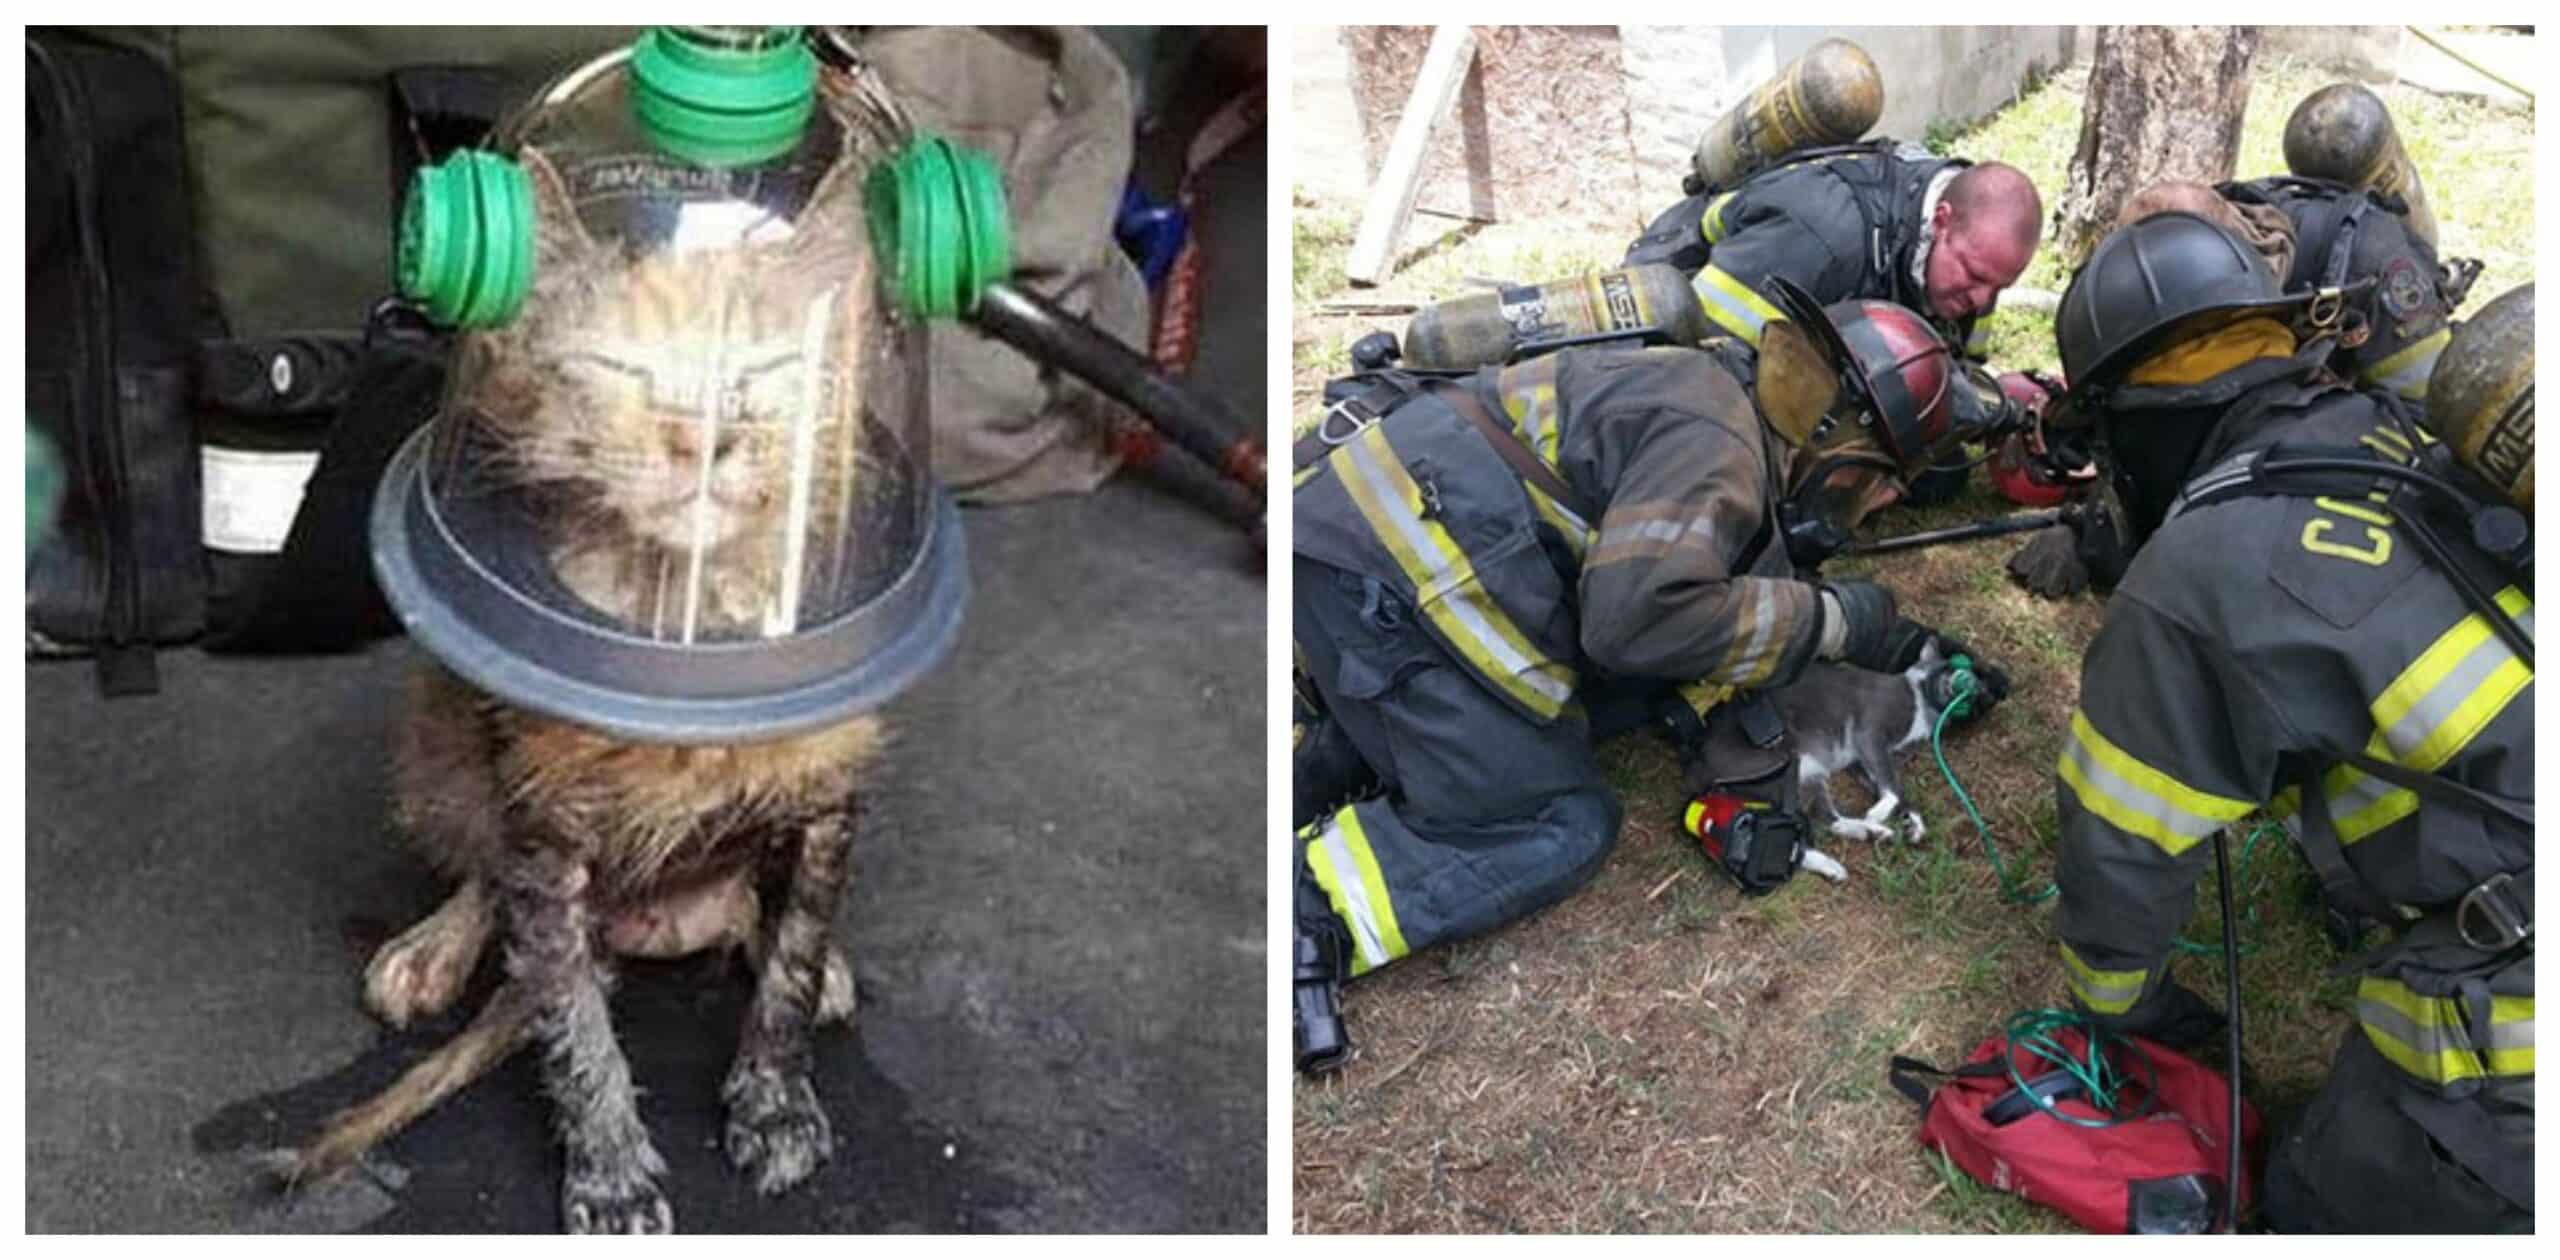 Firefighters use a specialised pet oxygen mask to save the life of an unconscious cat